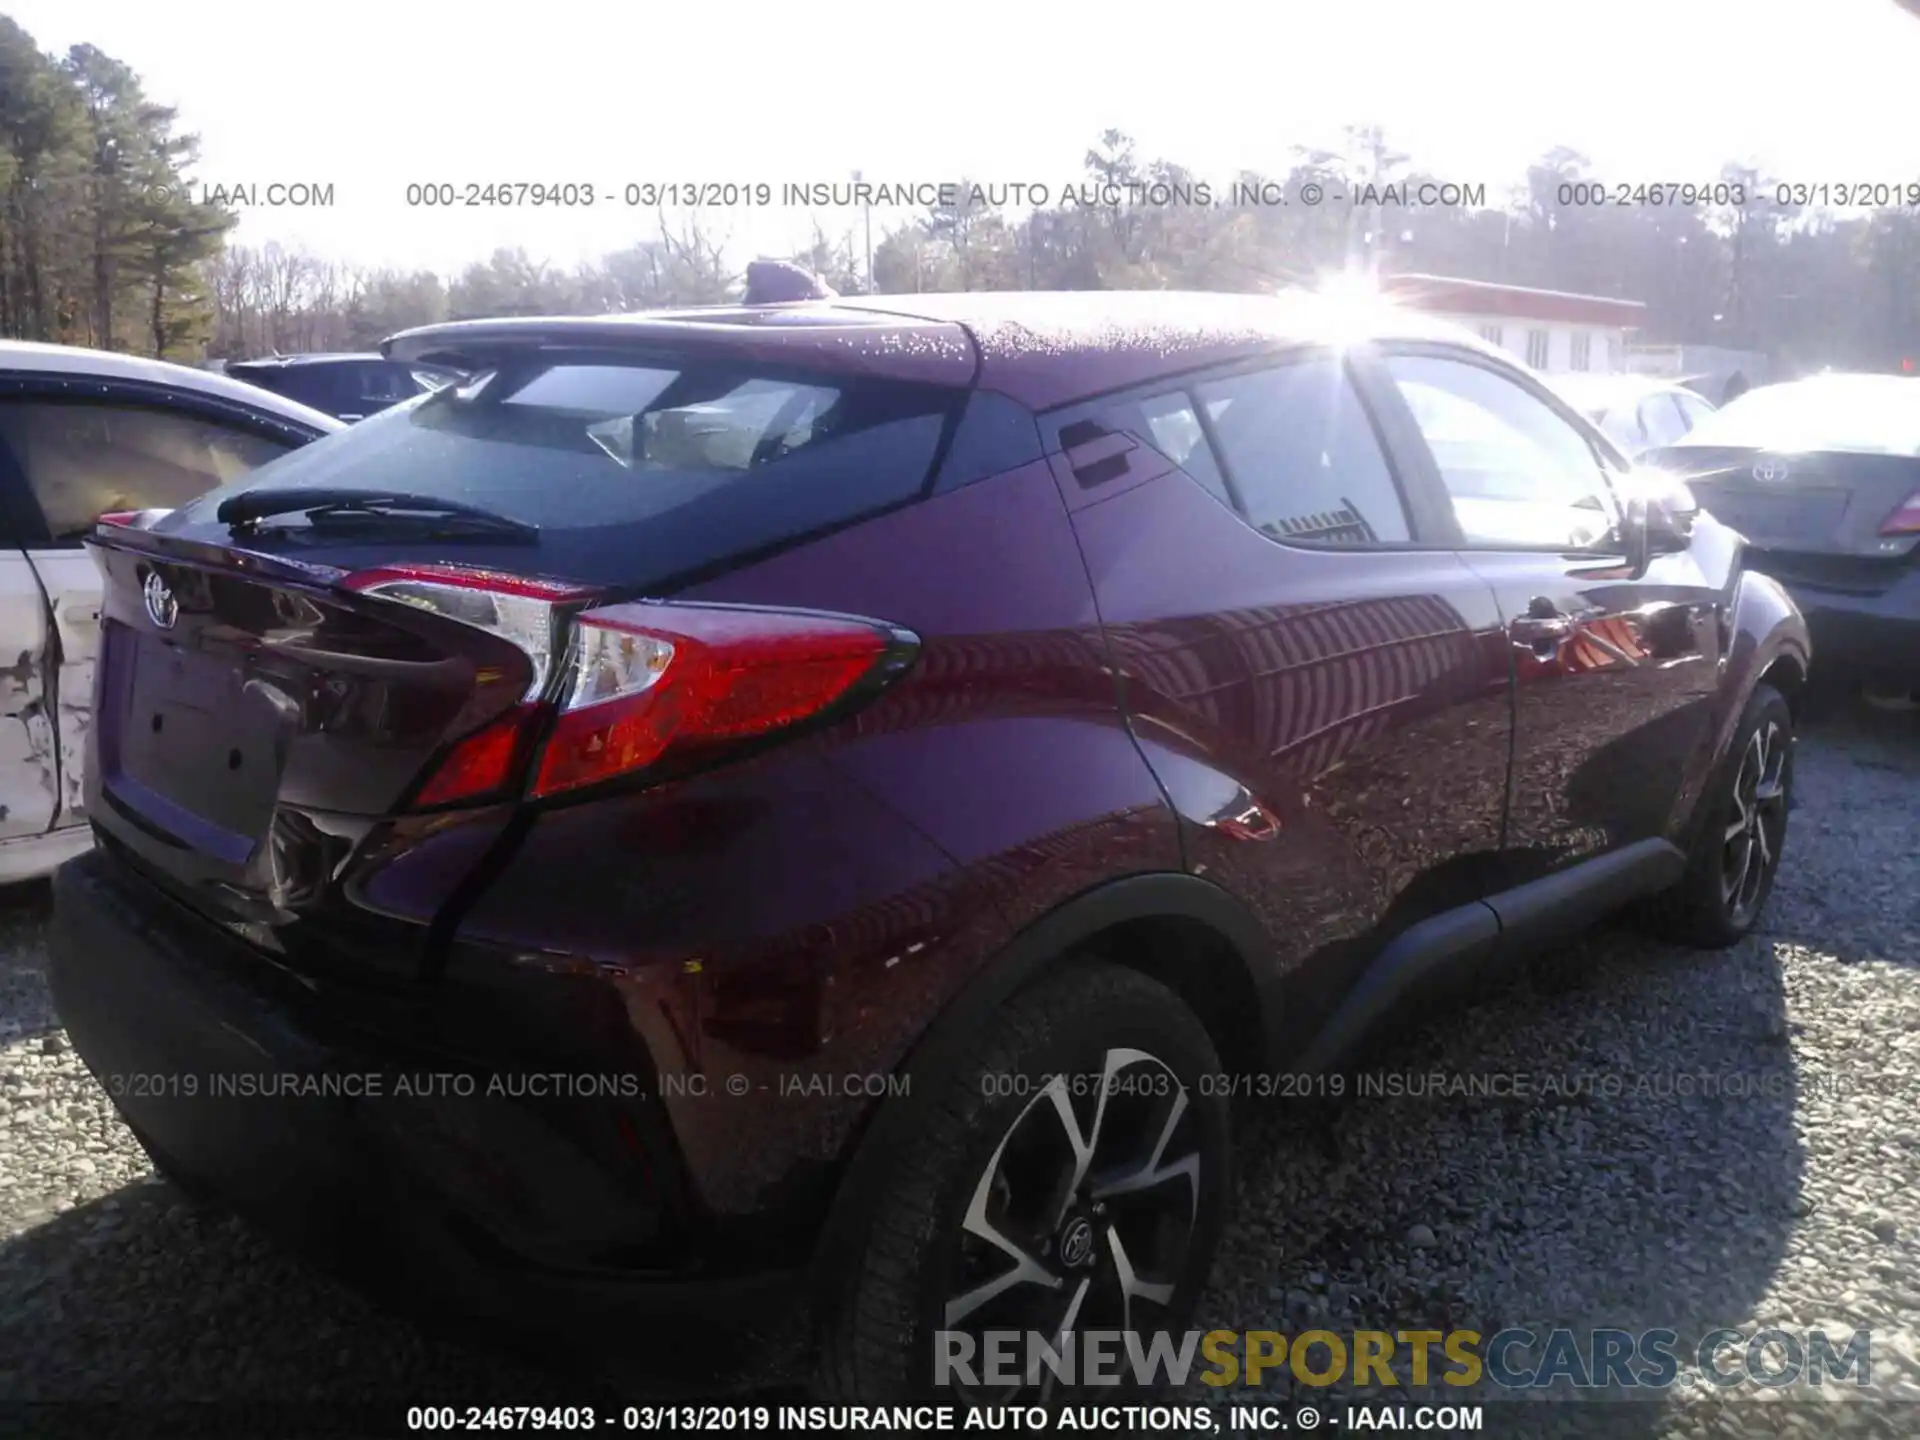 4 Photograph of a damaged car NMTKHMBXXKR081980 TOYOTA C-HR 2019